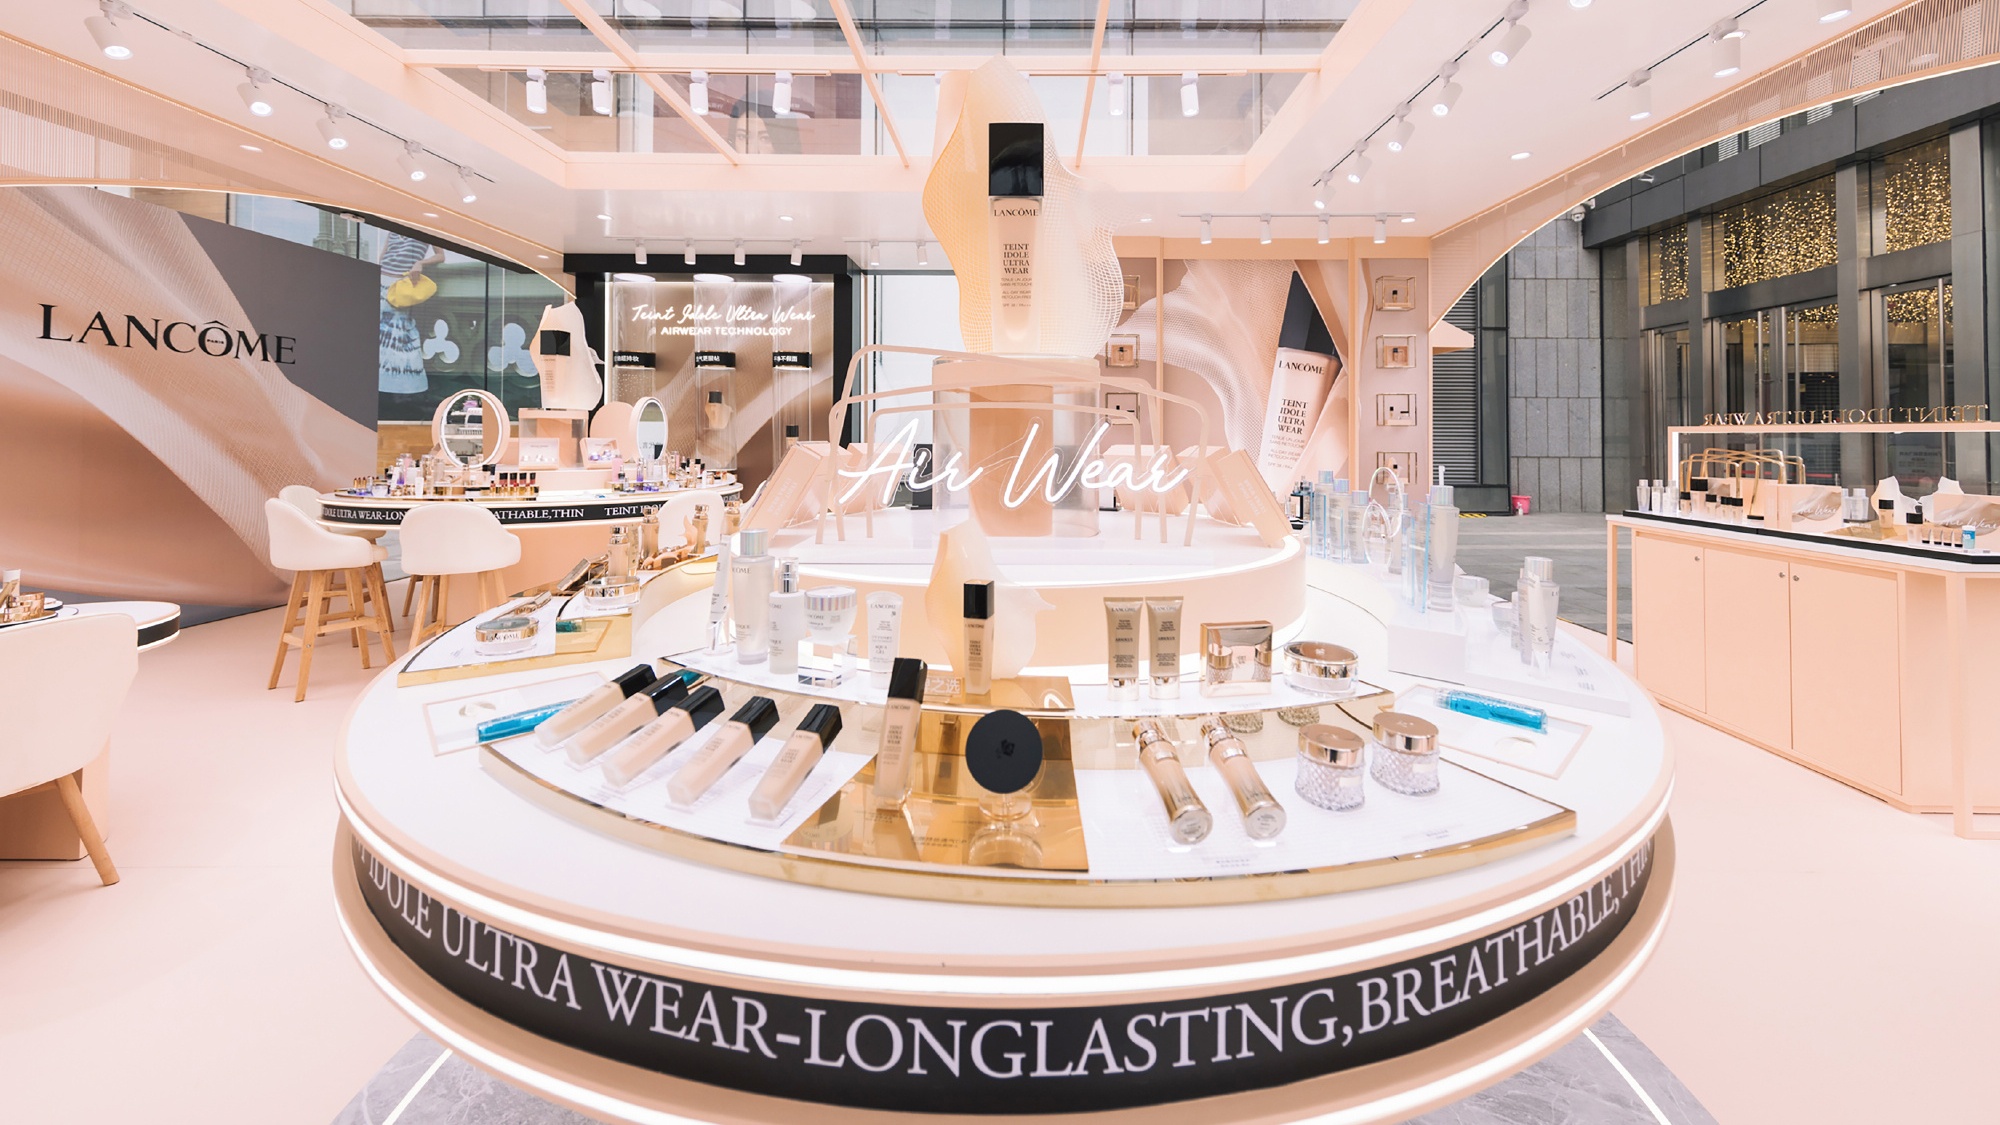 While L’Oréal and Hermès outperformed competitors in 2022, Canada Goose struggled with COVID-19 disruptions in December, its key trading month. Photo: Lancôme